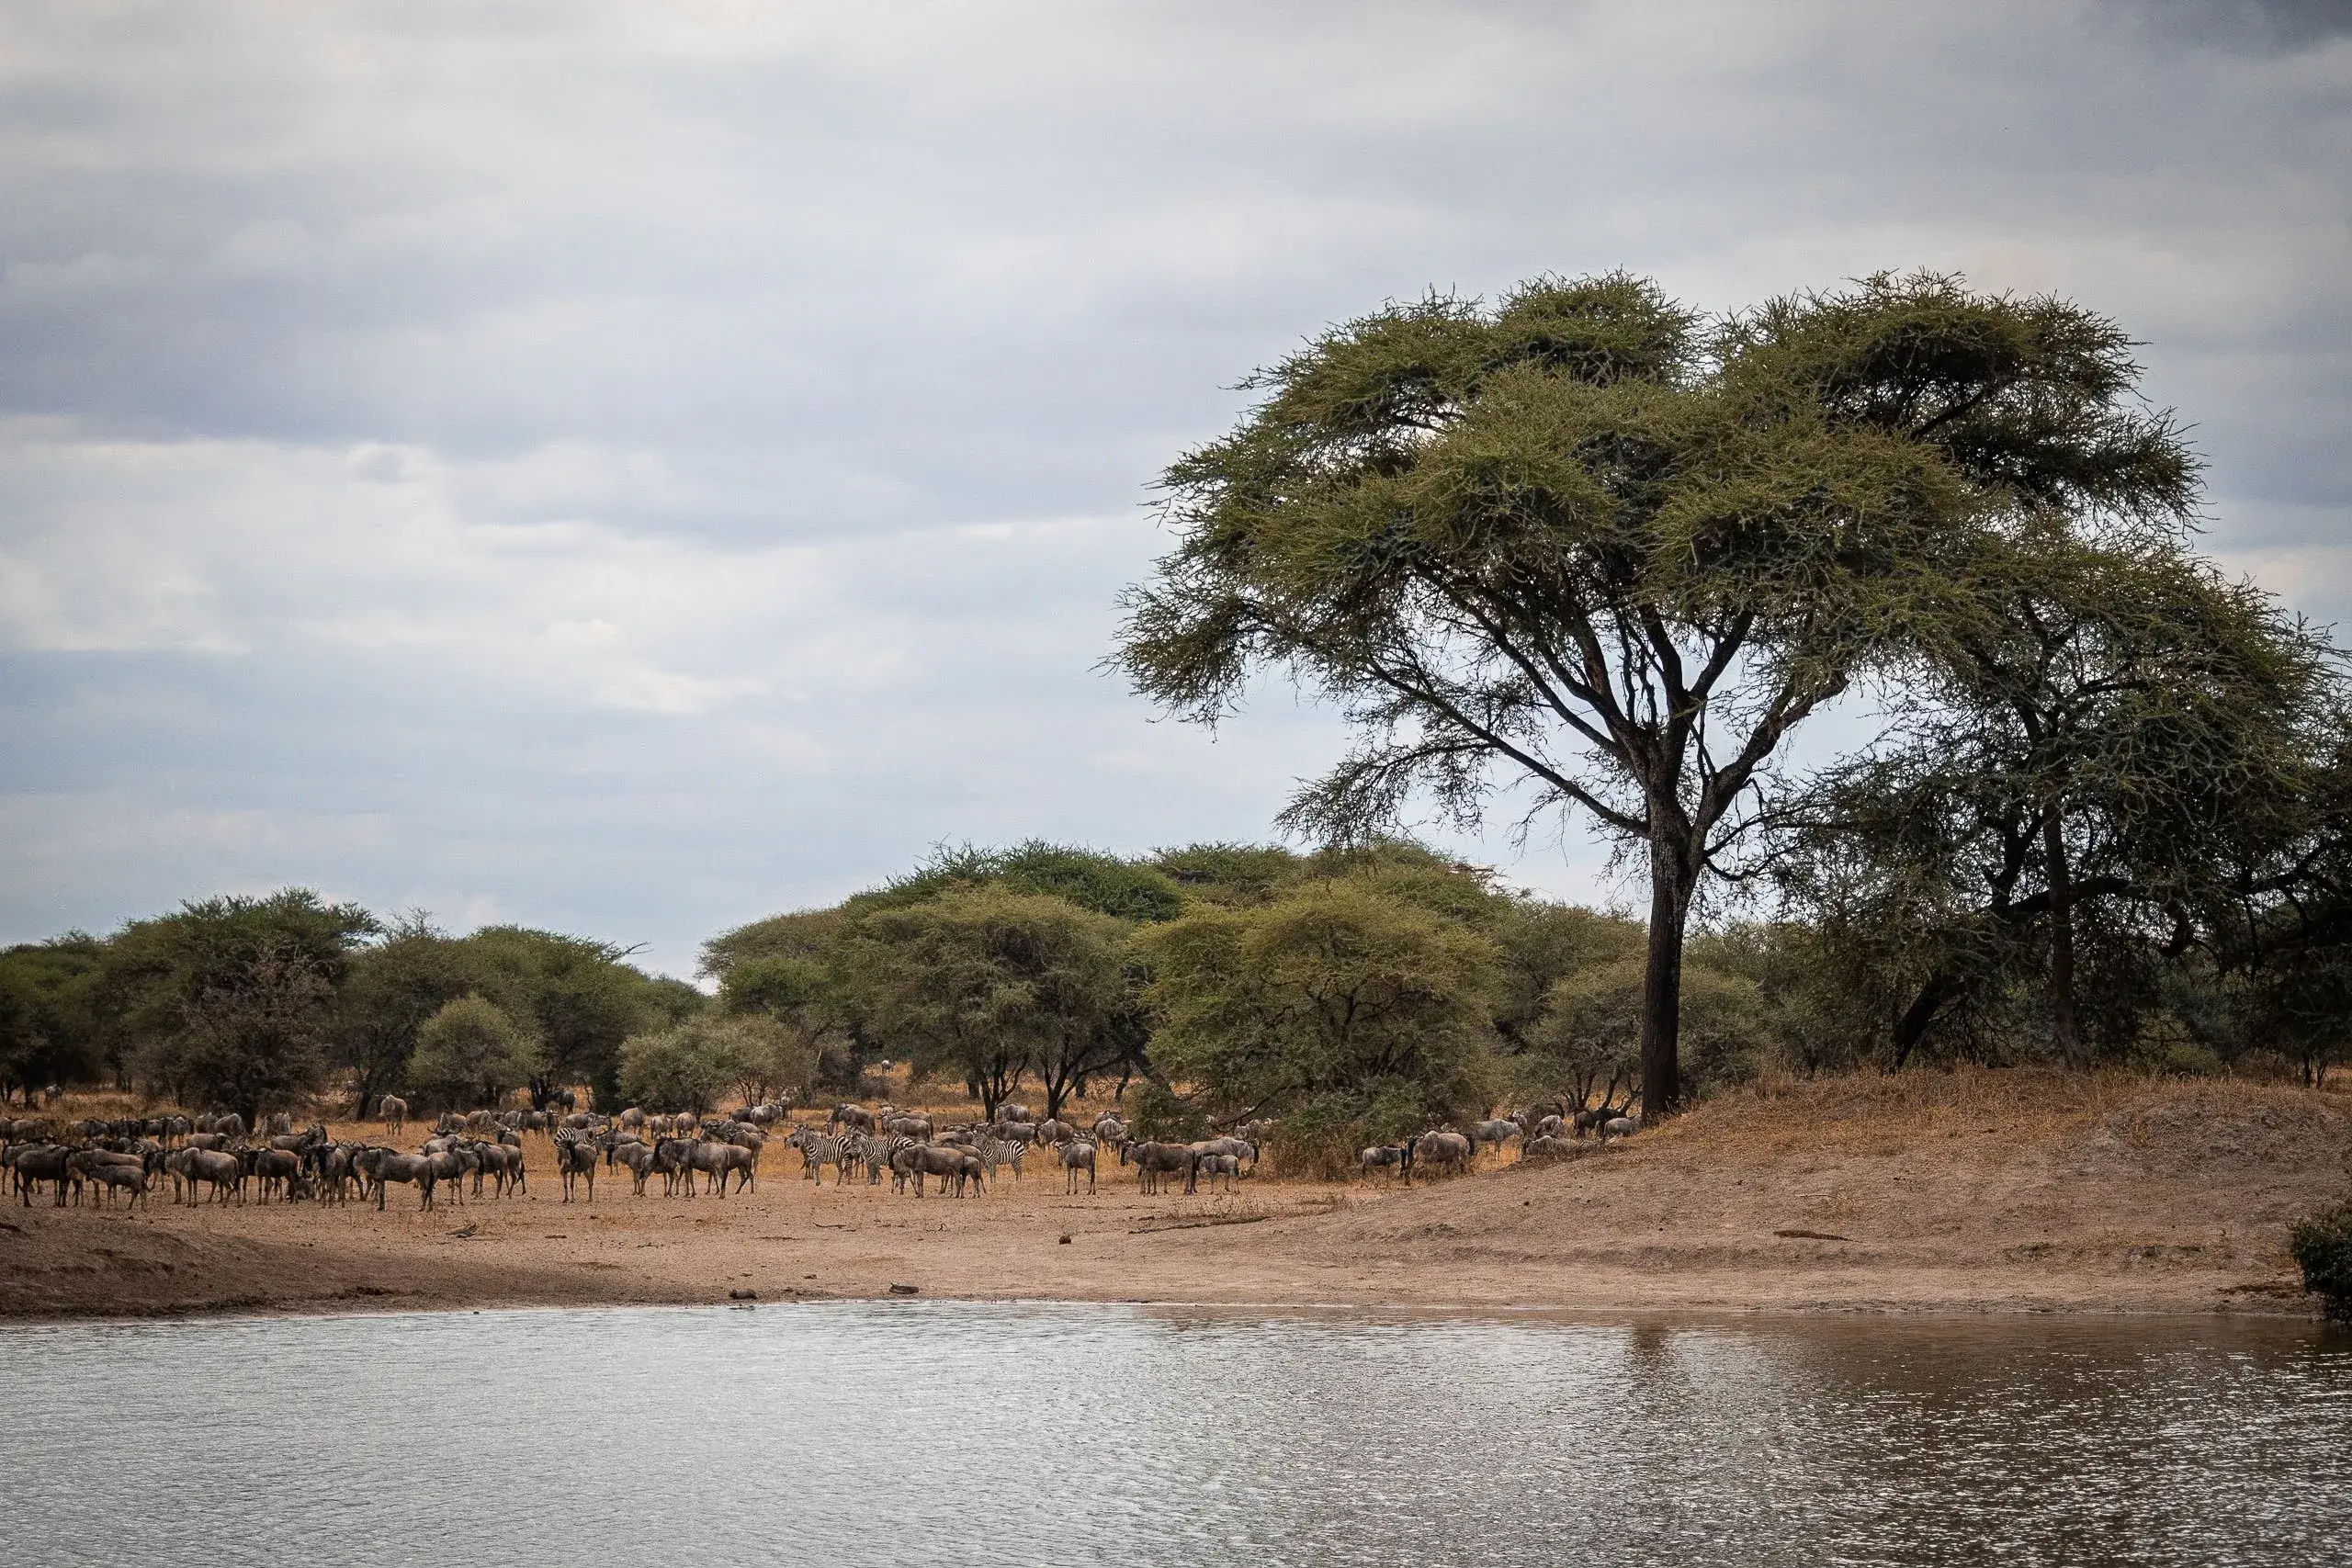 A herd of wildebeest in Tanzanian national parks